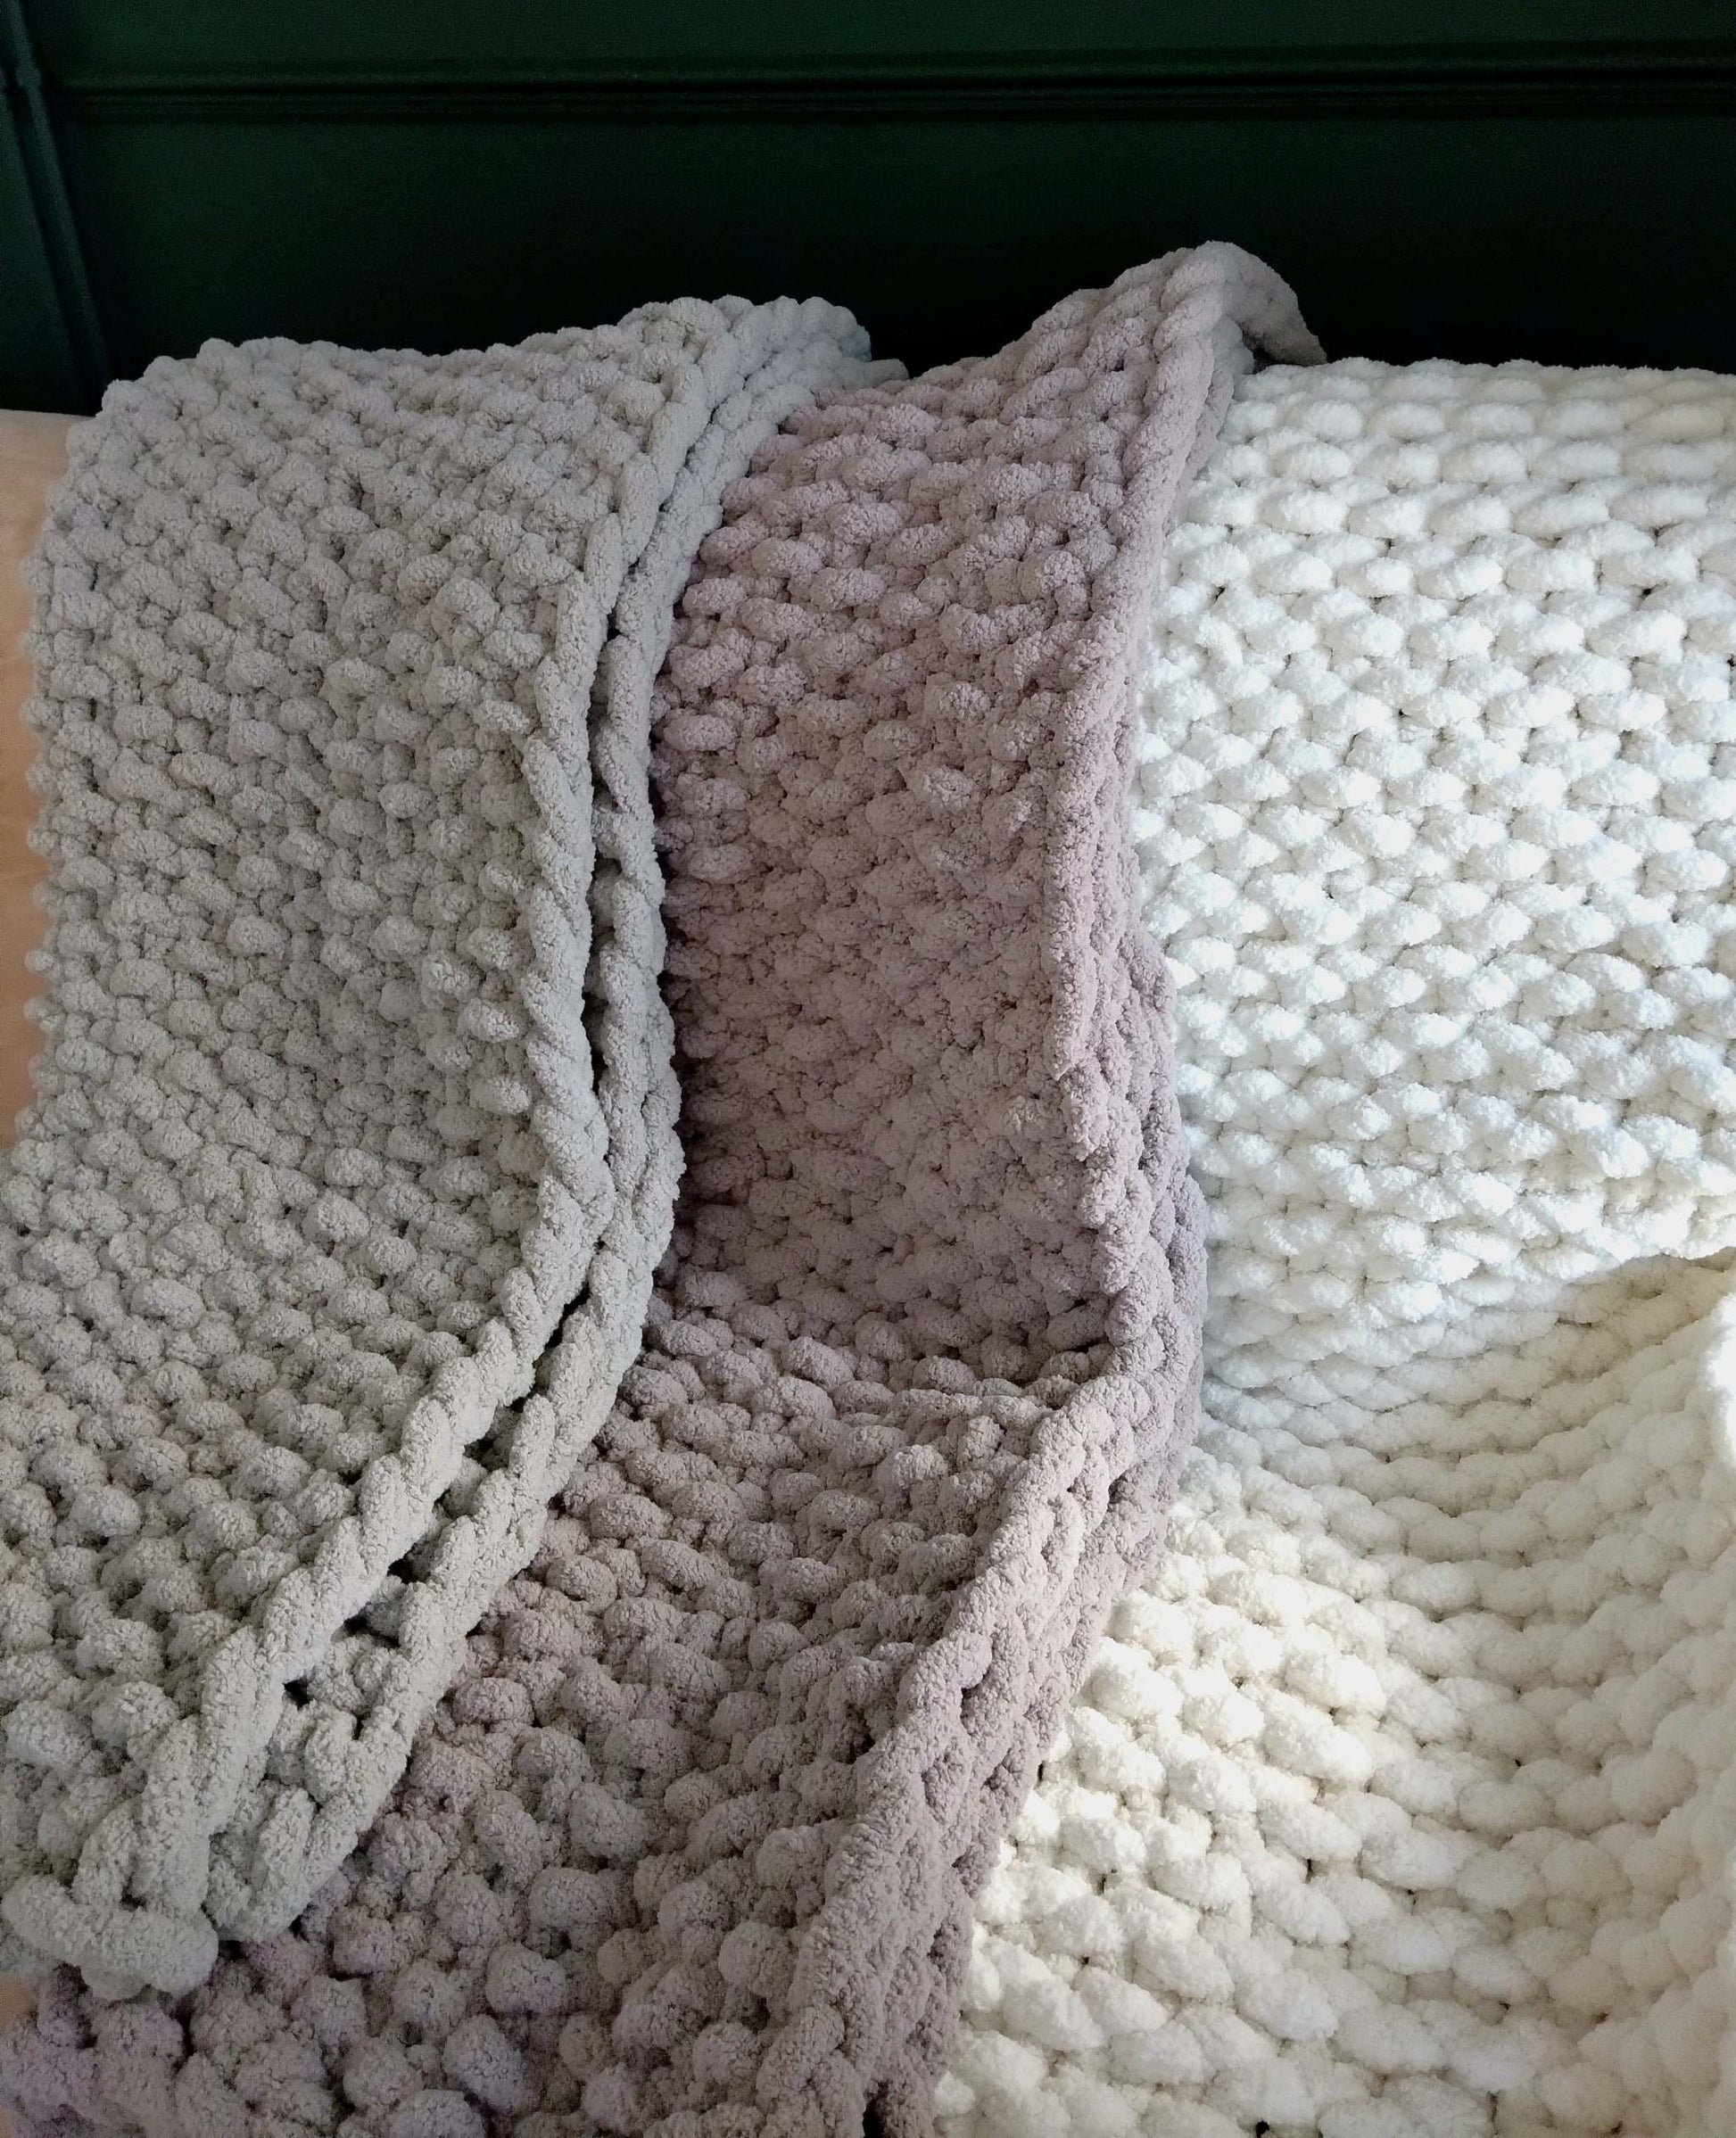 hand-knitted blankets & throws